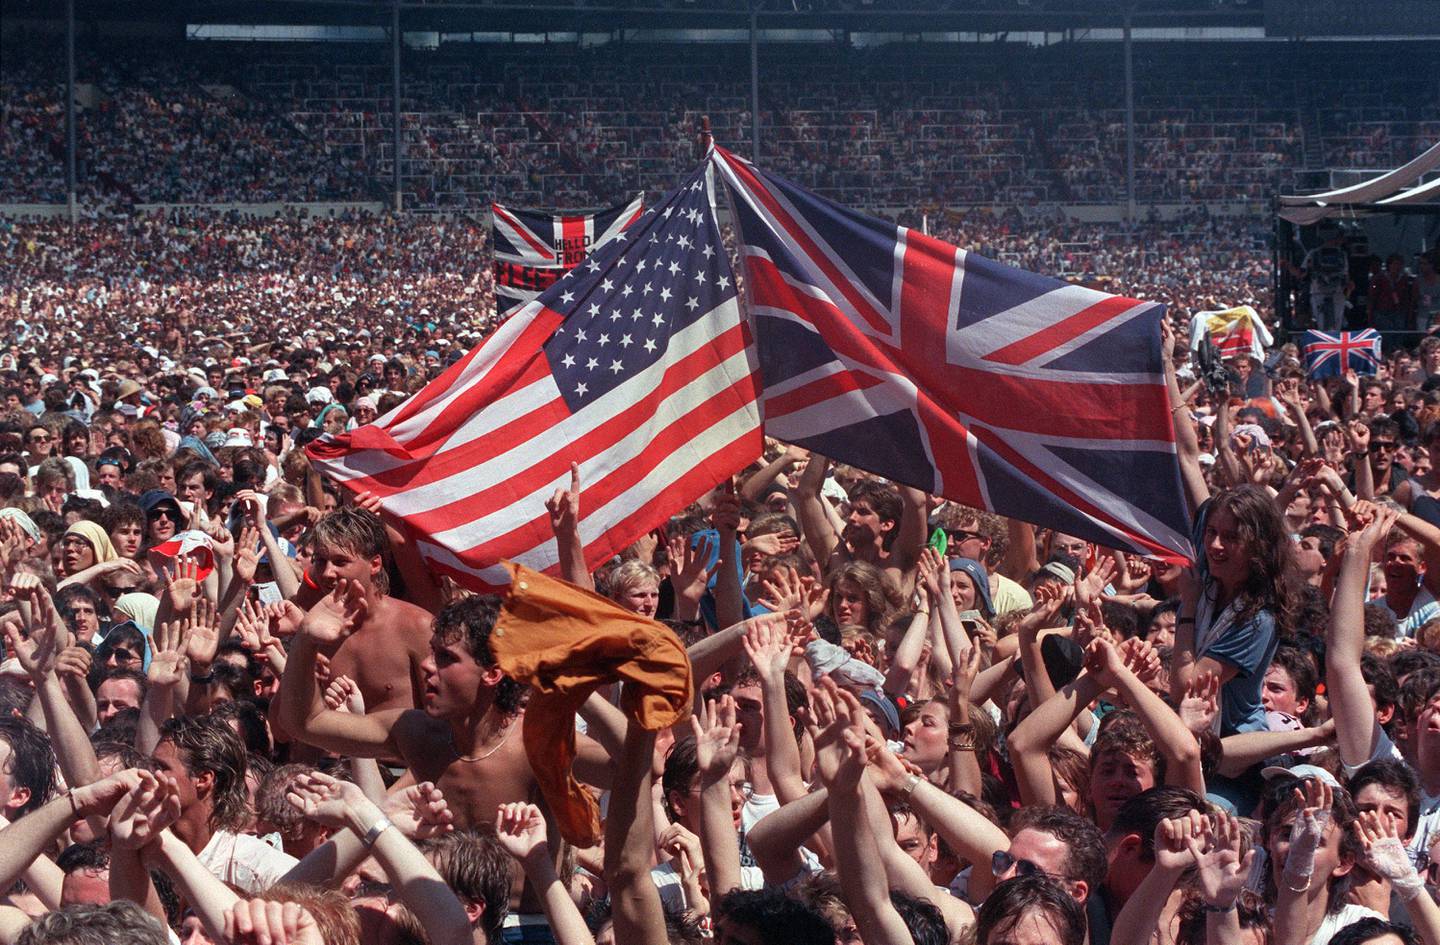 Fans wave flags, the U.S. Stars and Stripes and Britain's Union Jack, at Wembley Stadium, London, July 13, 1985, at the end of the Live Aid famine relief concert for Africa. (AP Photo/Joe Schaber)